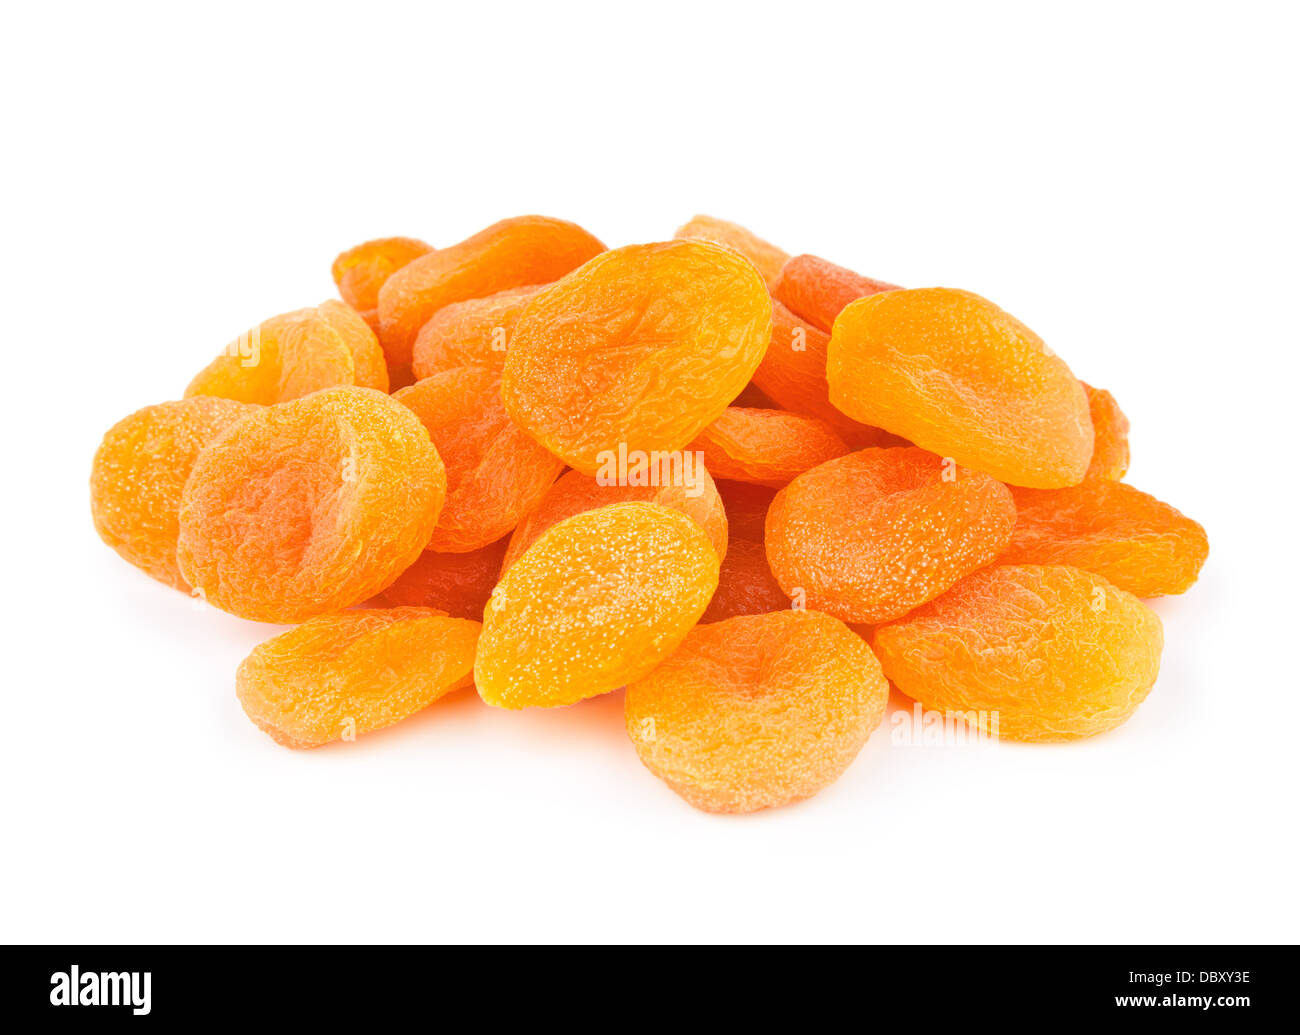 Delicious Dried Apricots Stock Photo